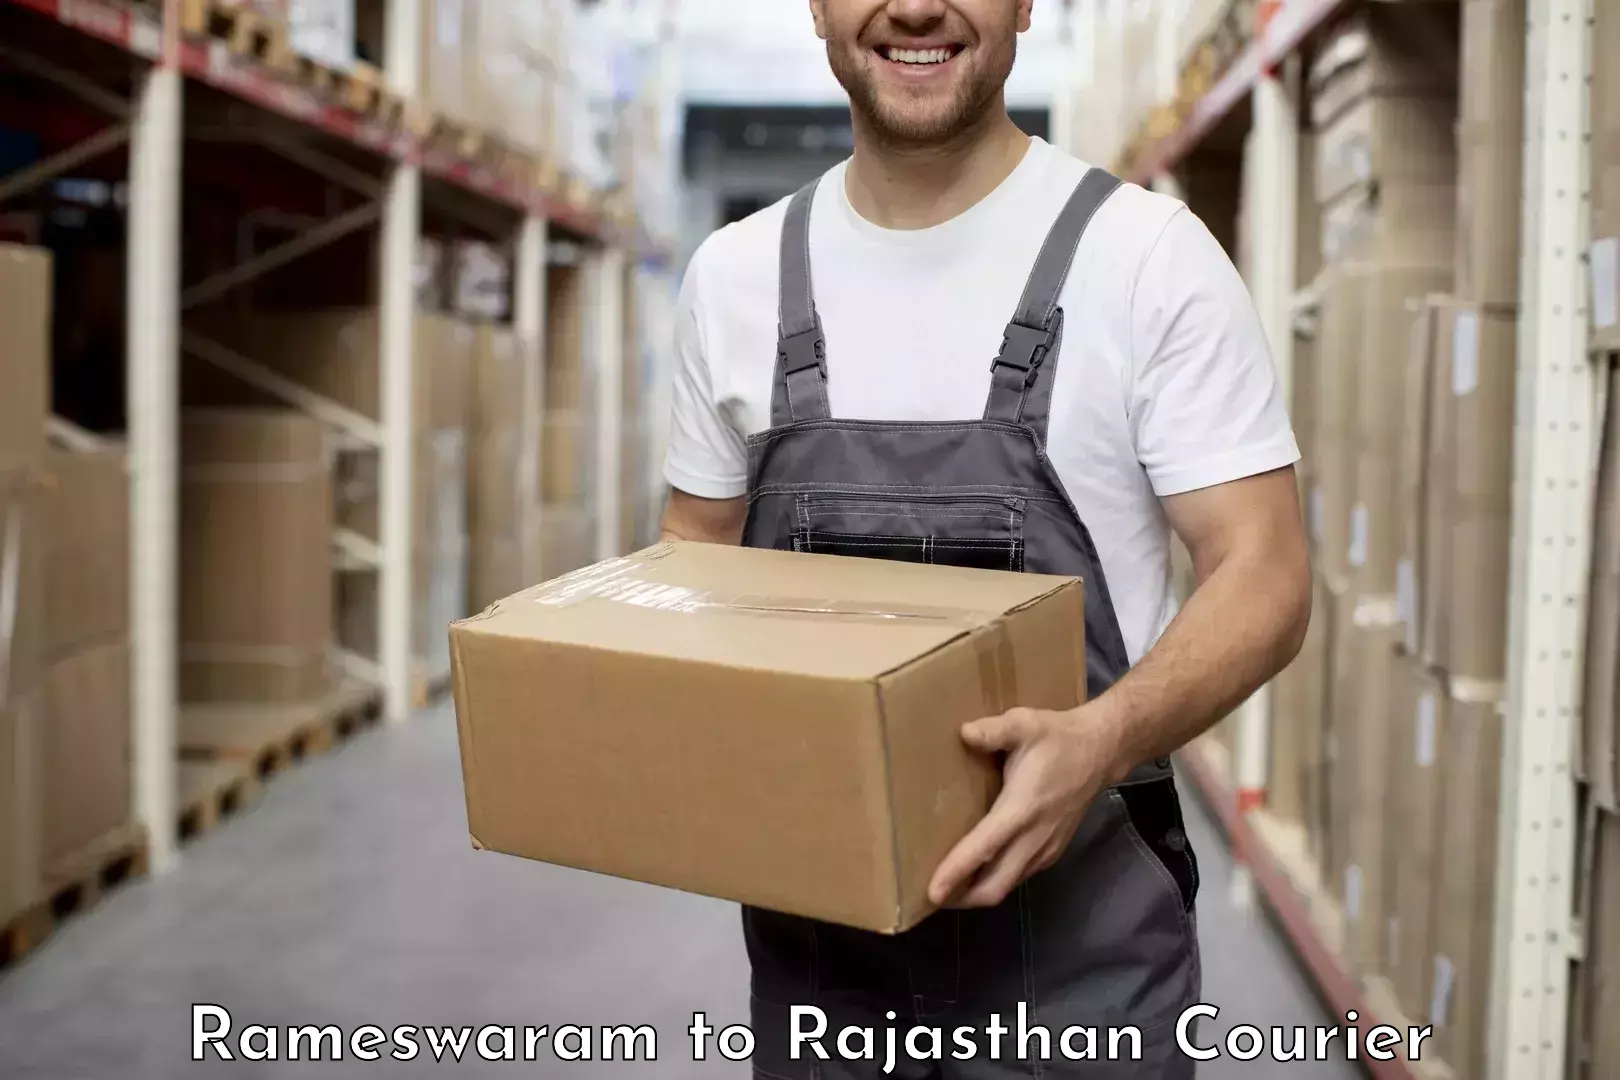 Automated parcel services Rameswaram to Alwar